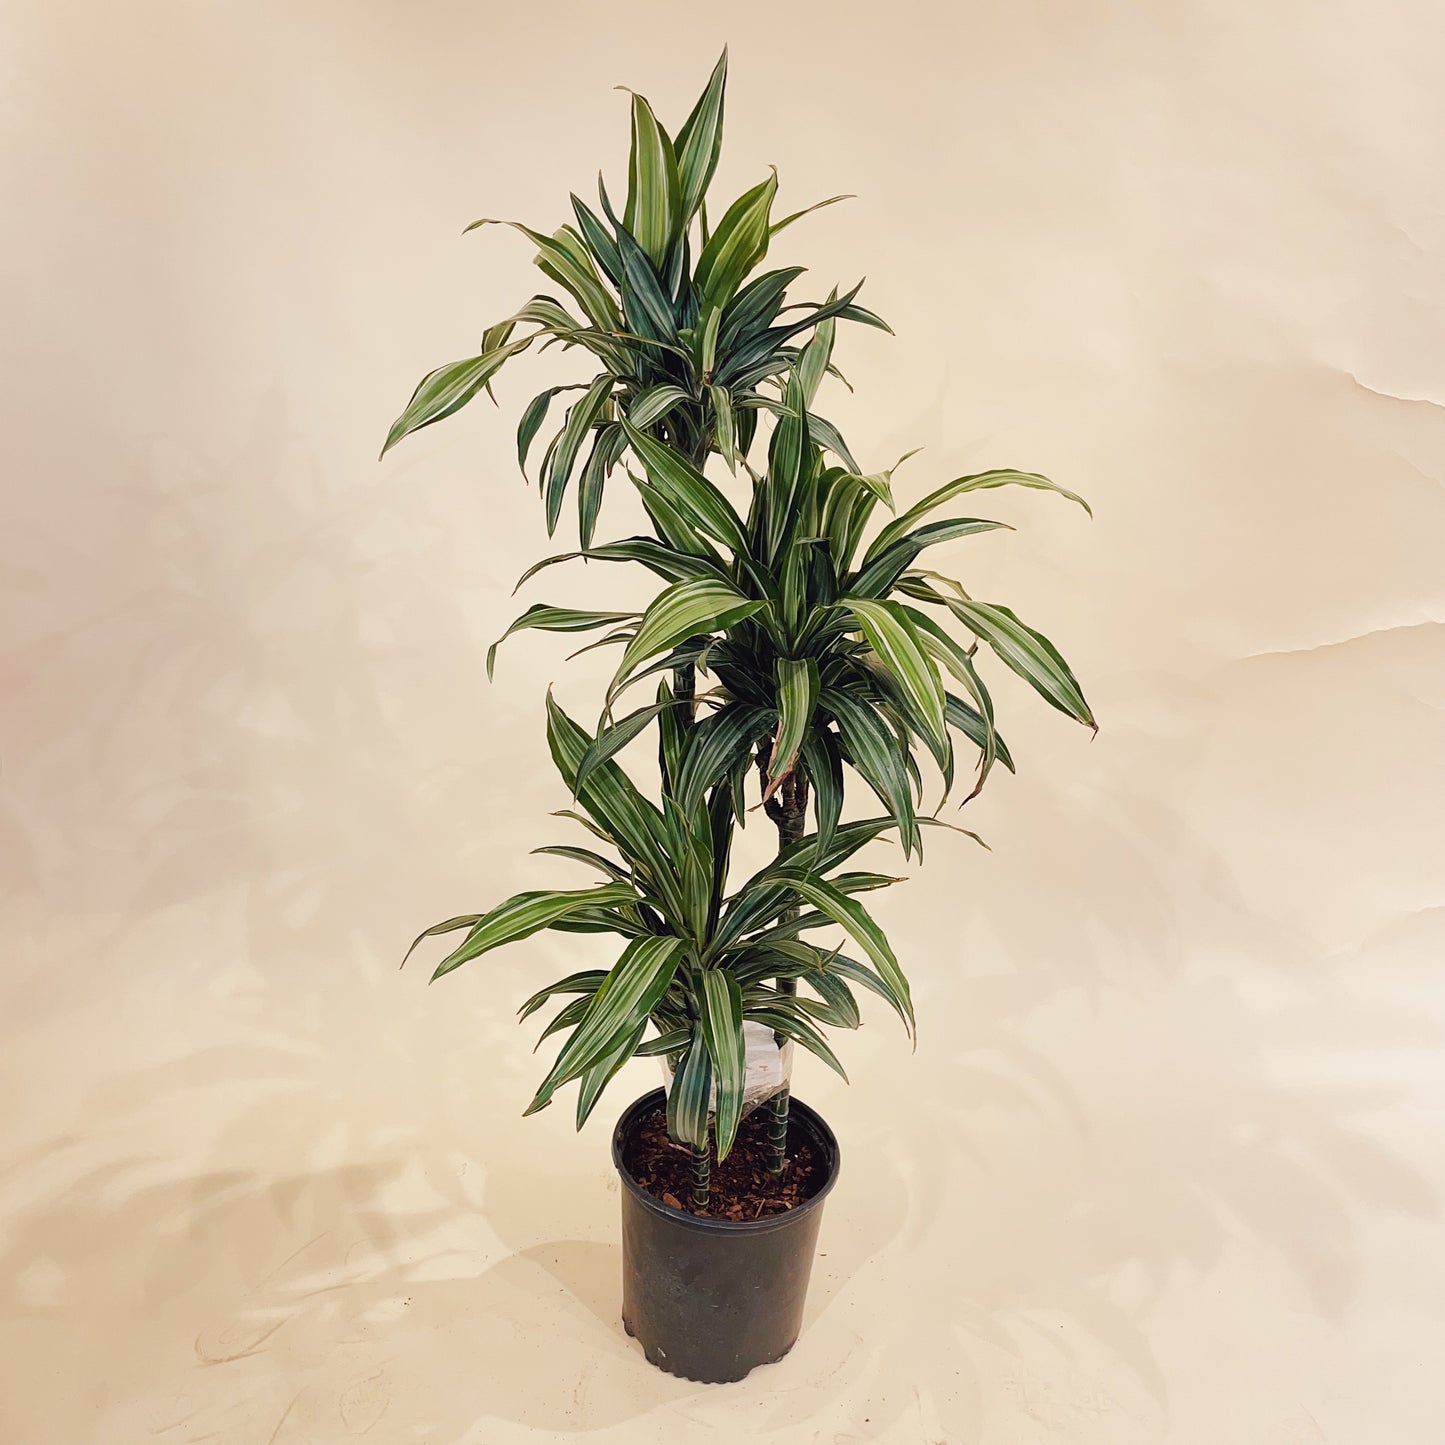 Warneckii Dracaena, Variegated Dracaena (Dracaena fragrans) in a 10 inch pot. Indoor plant for sale by Promise Supply for delivery and pickup in Toronto